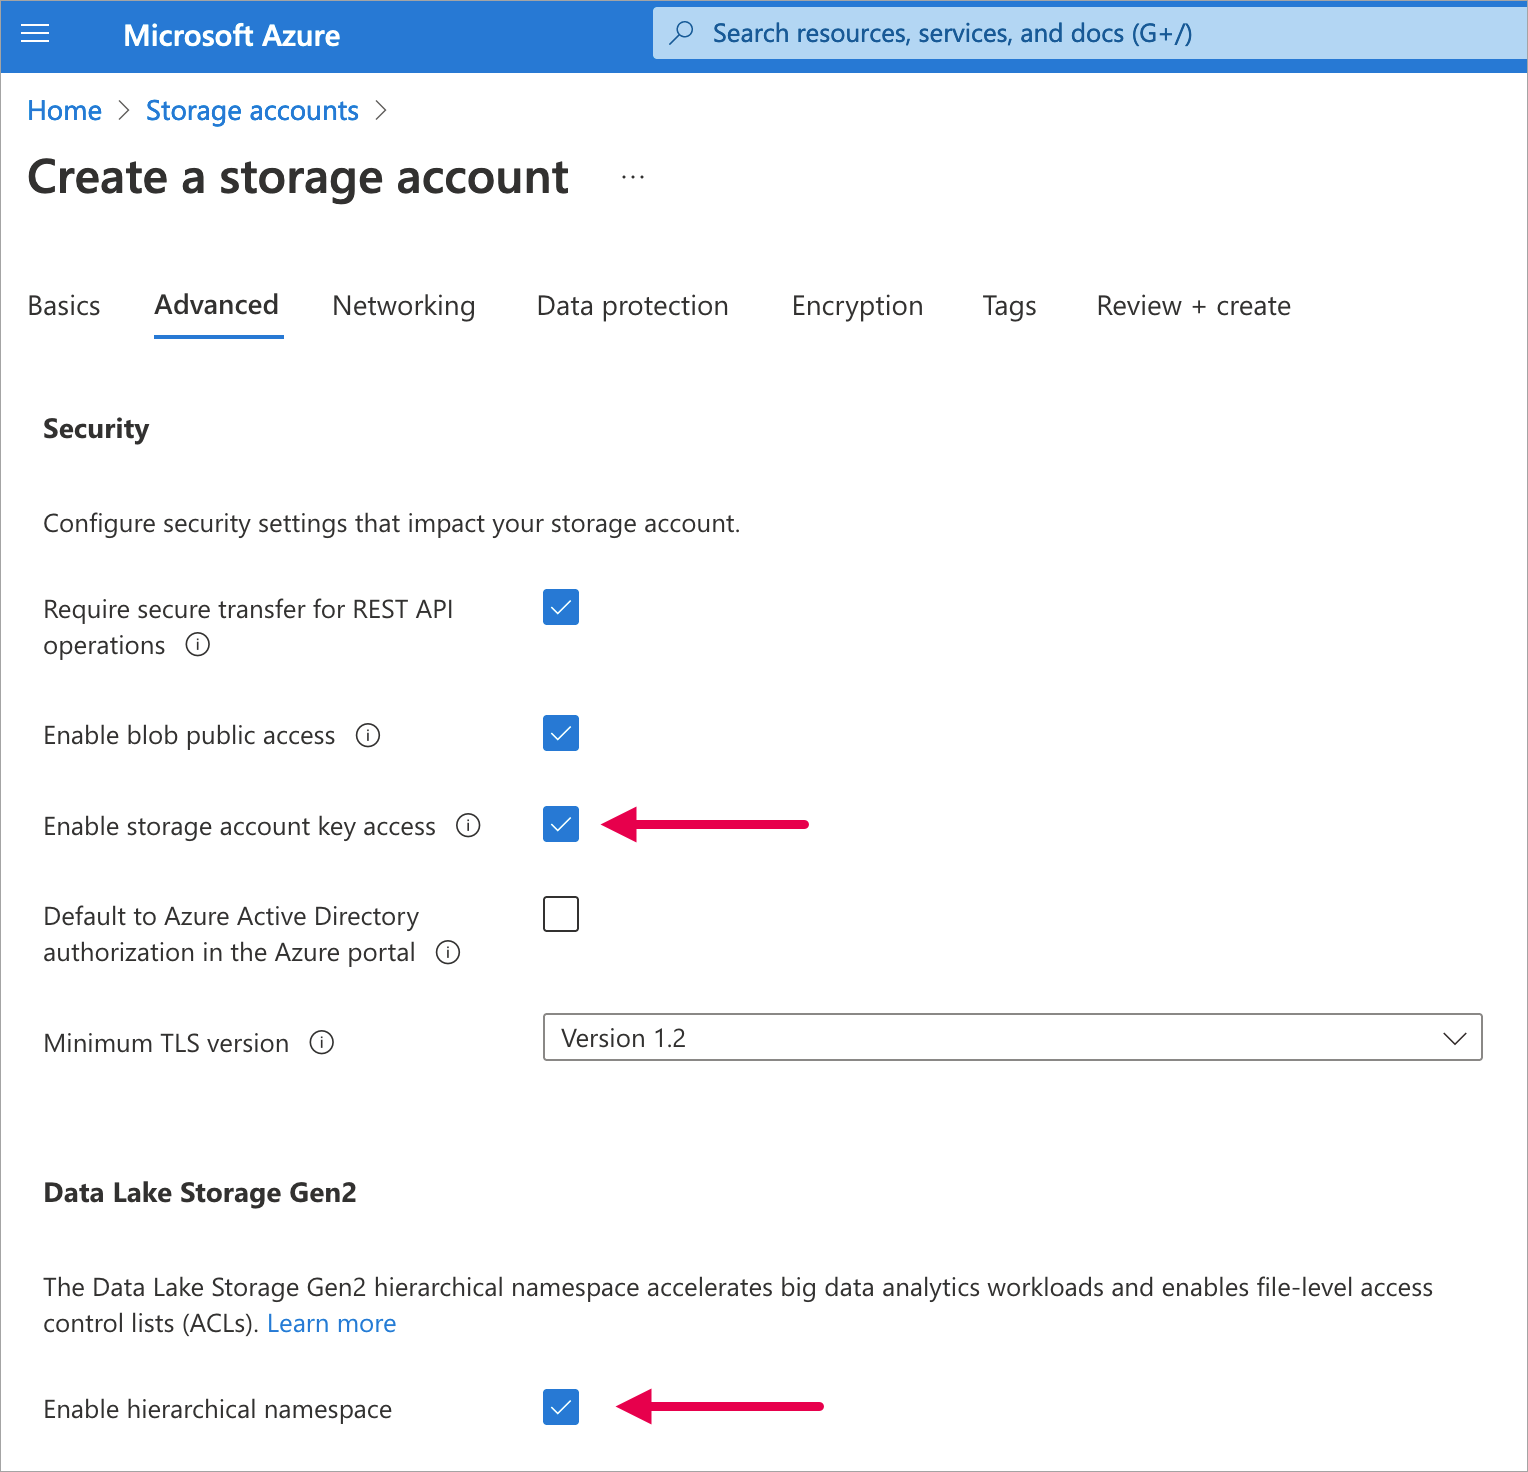 MS Azure storage setting requirements